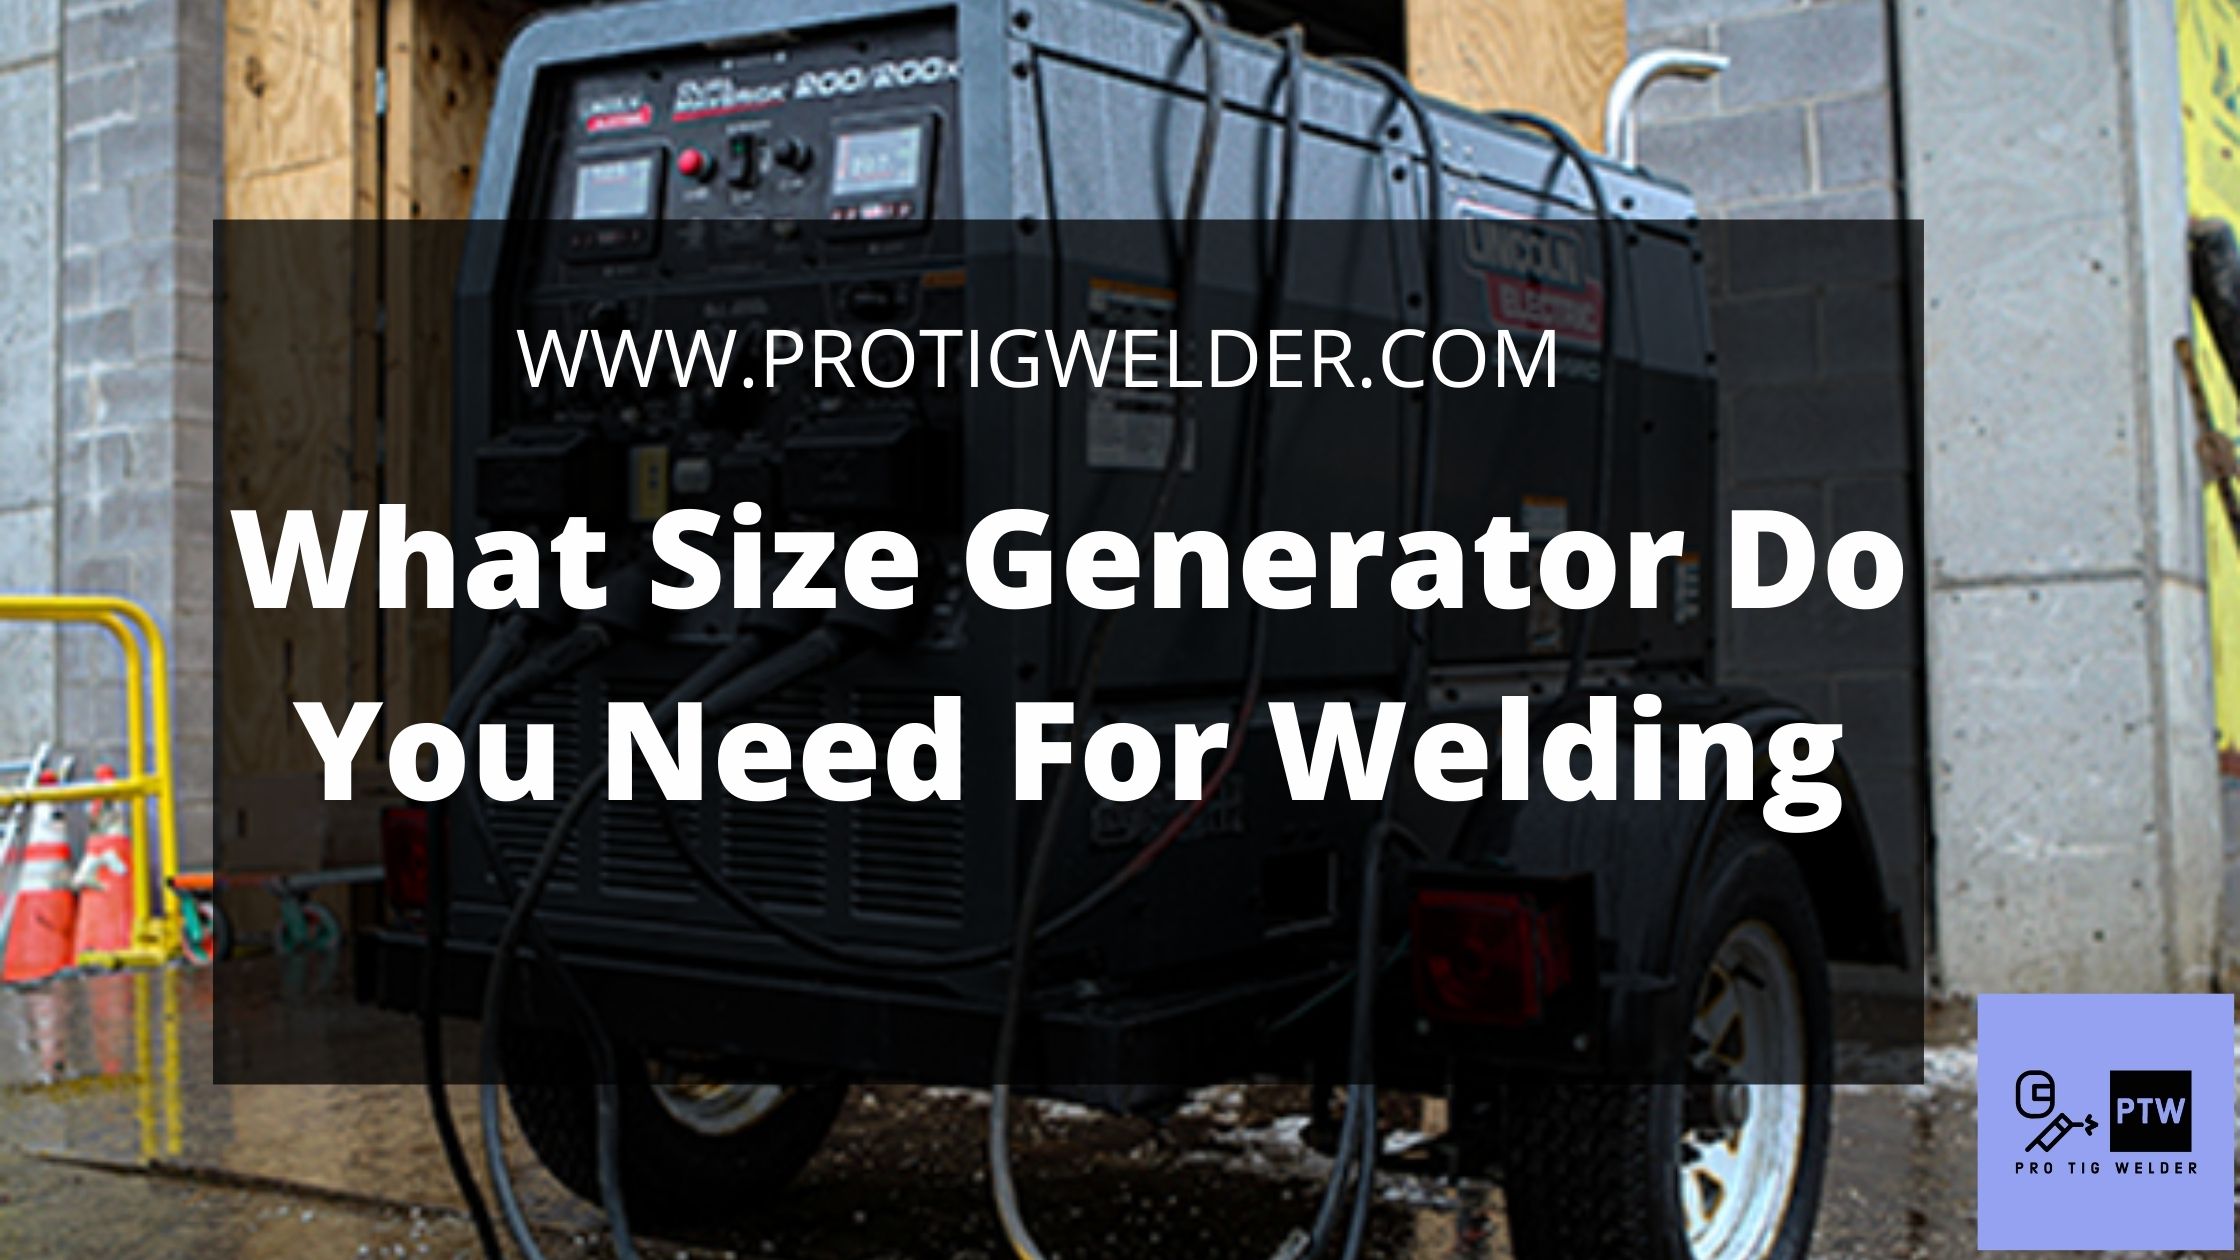 What Size Generator Do You Need For Welding